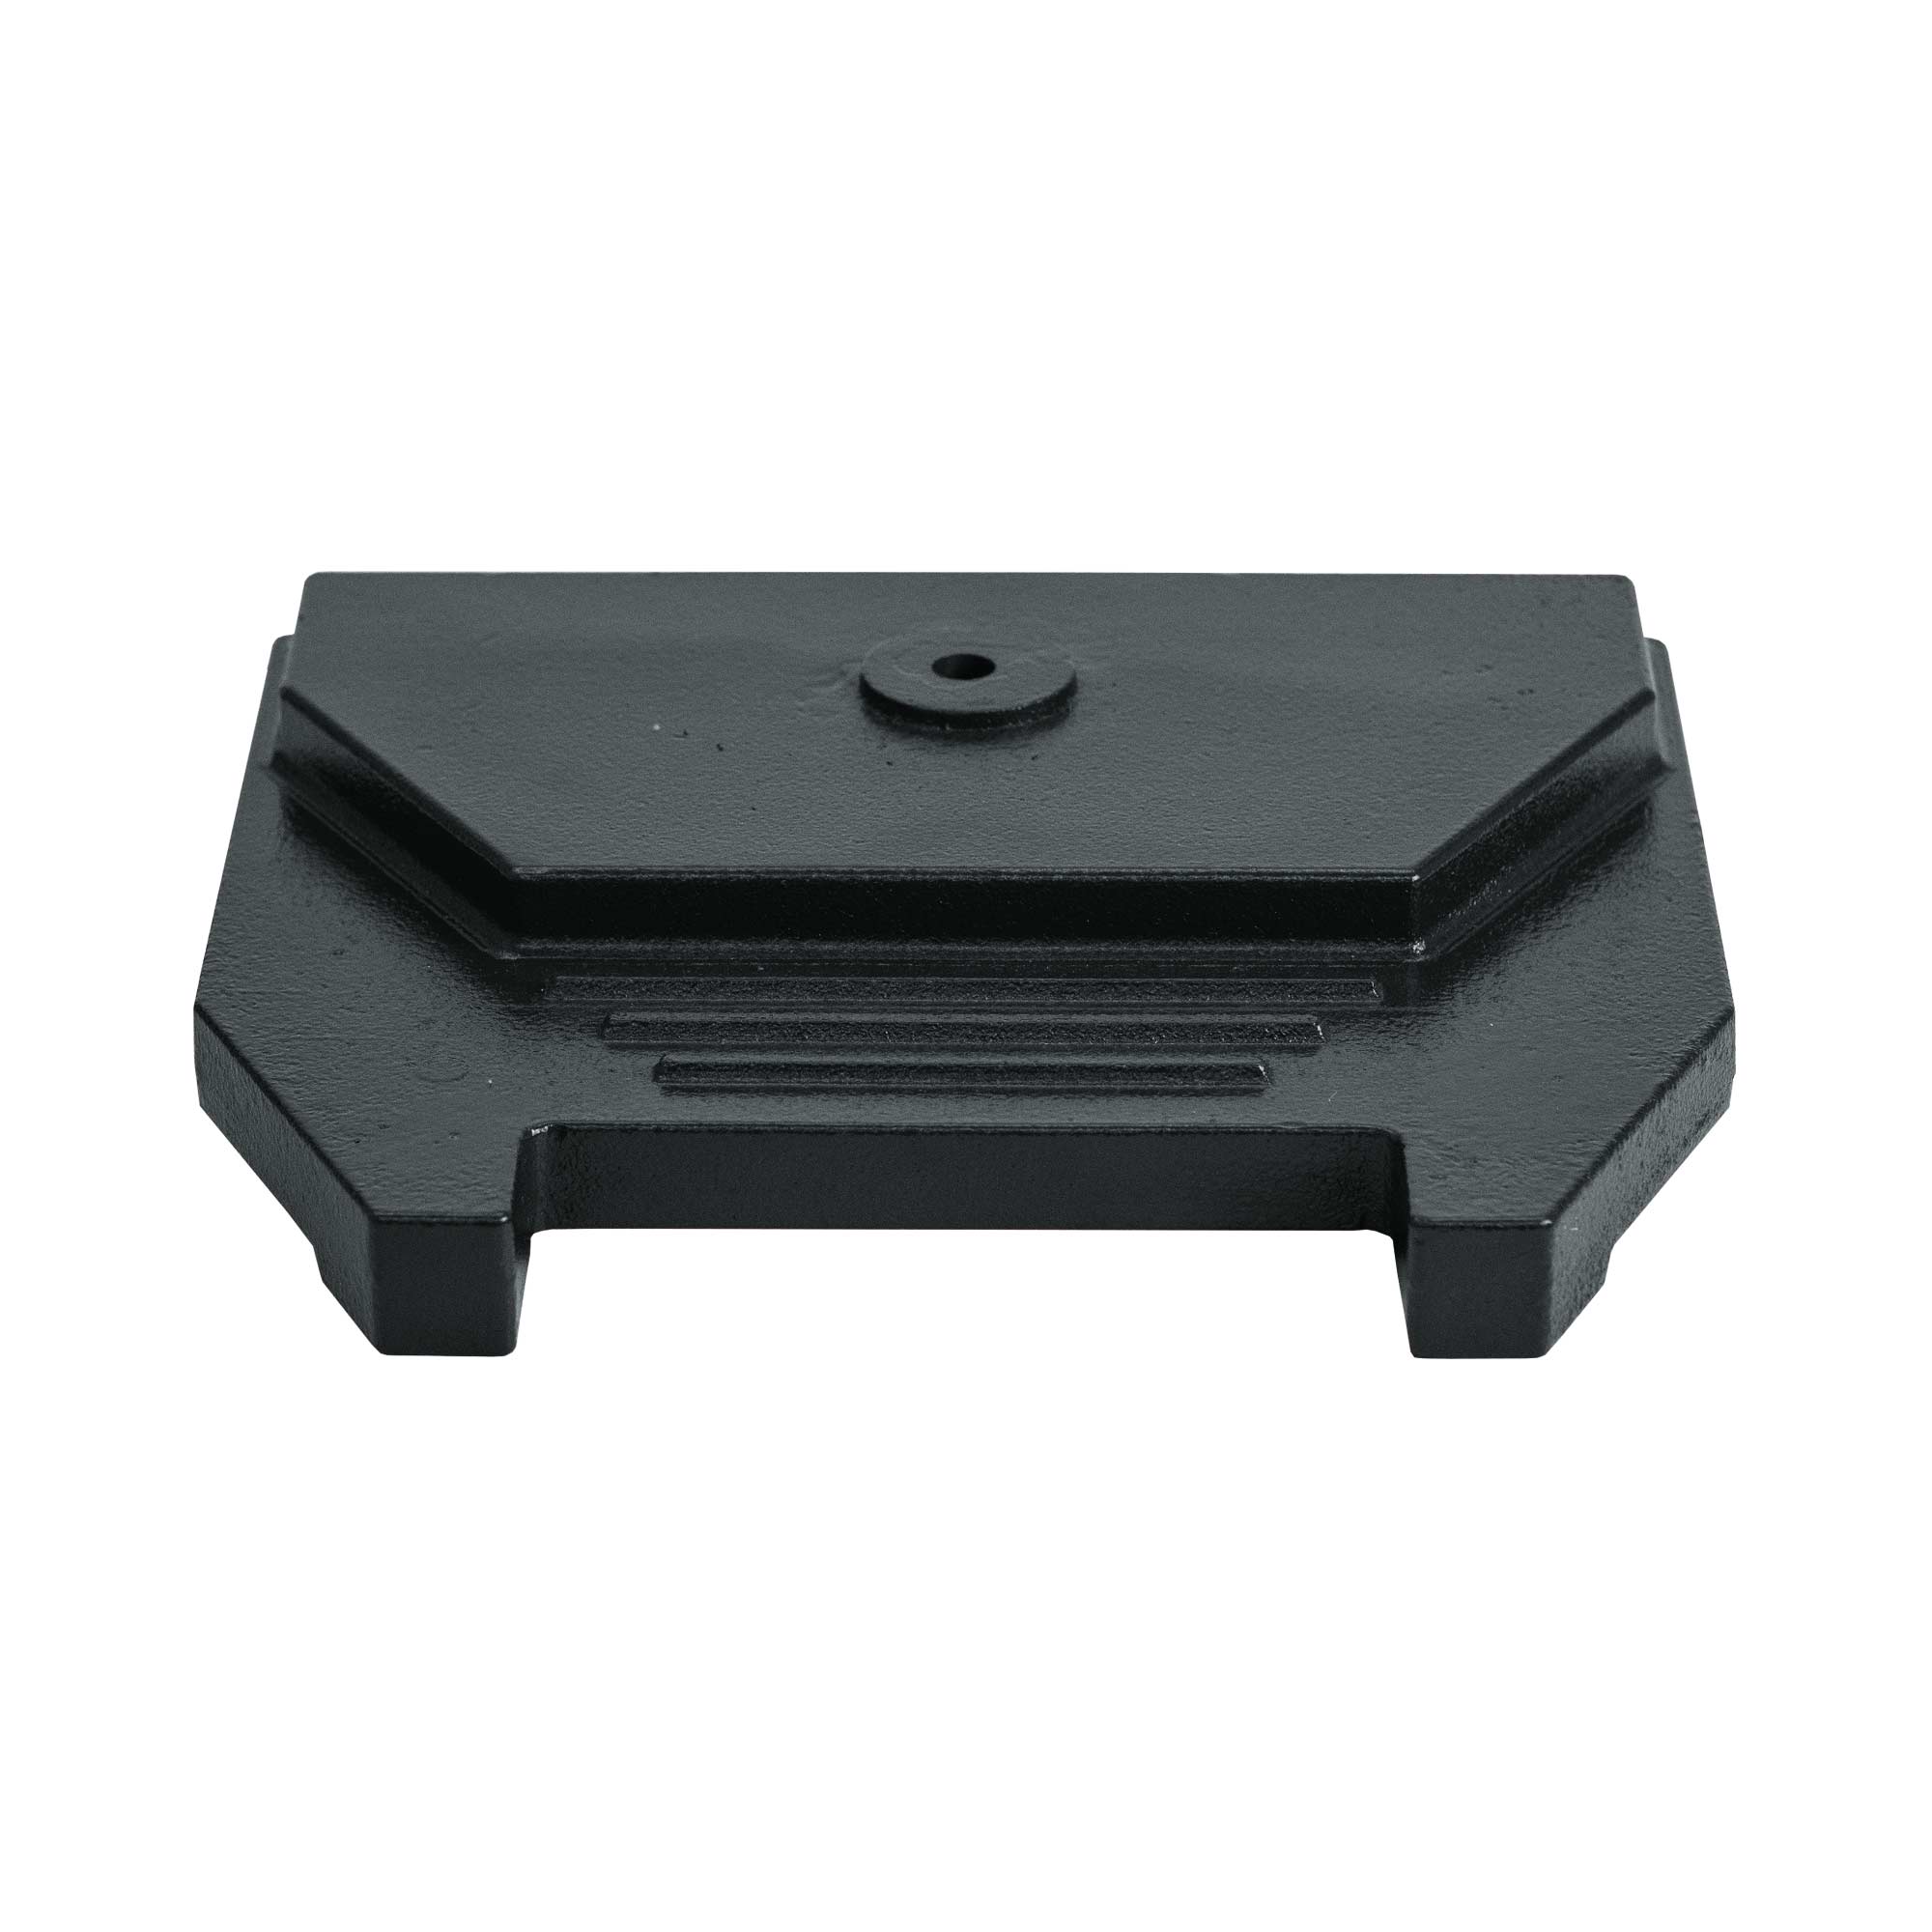 【11458-B】HEAVY CAST IRON TABLETOP WEIGHTE